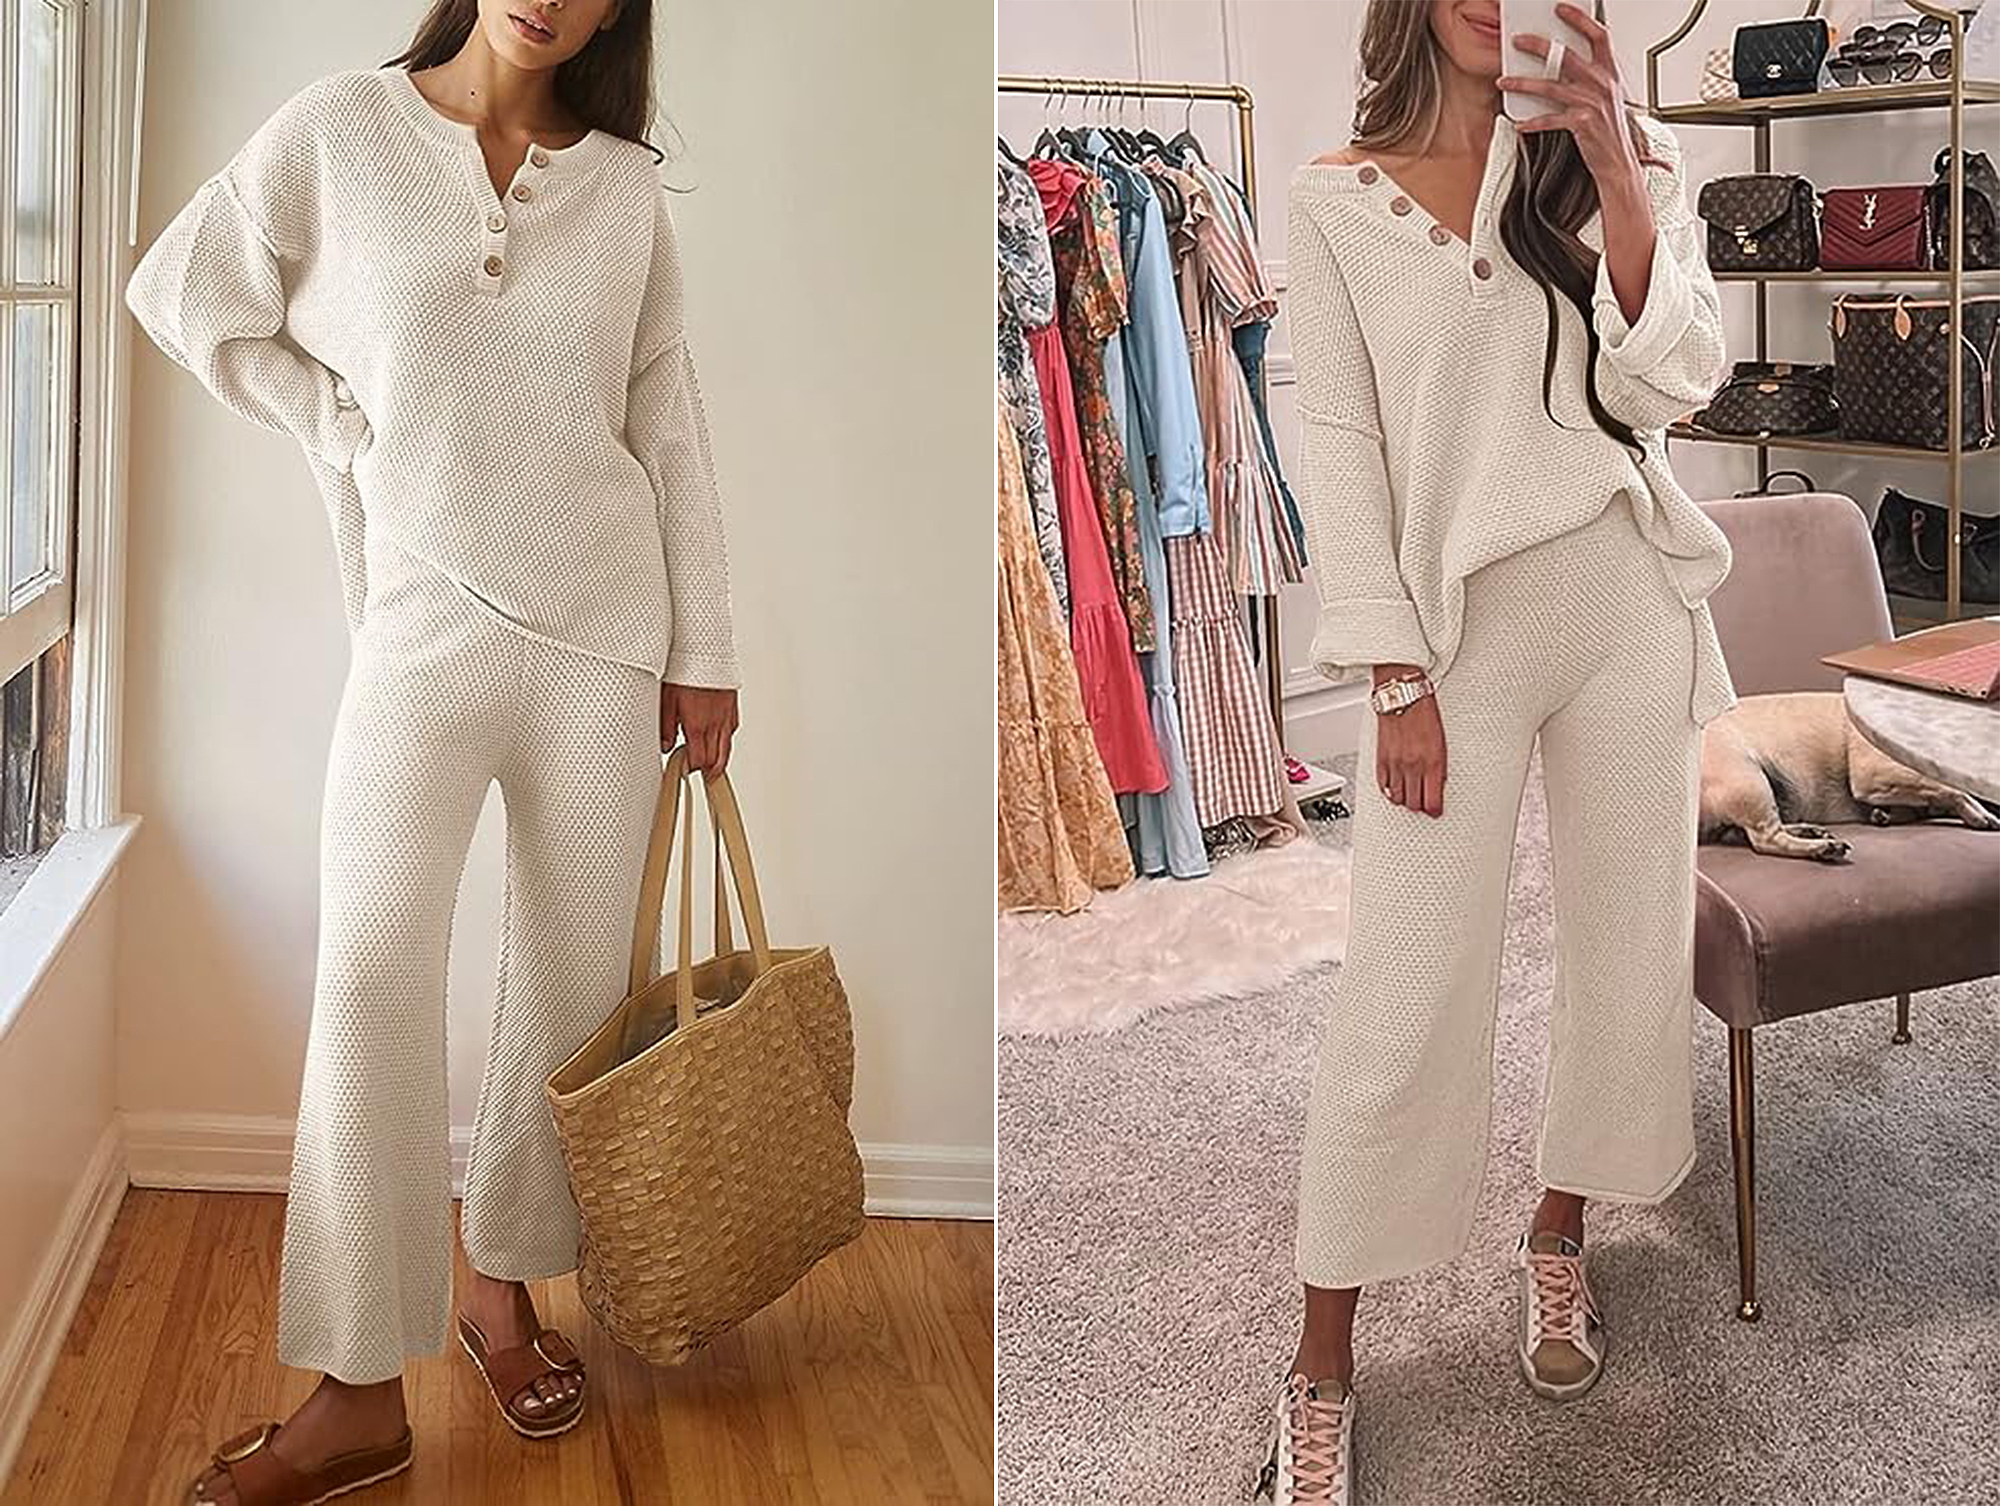 Luxury loungewear is no longer just for lounging